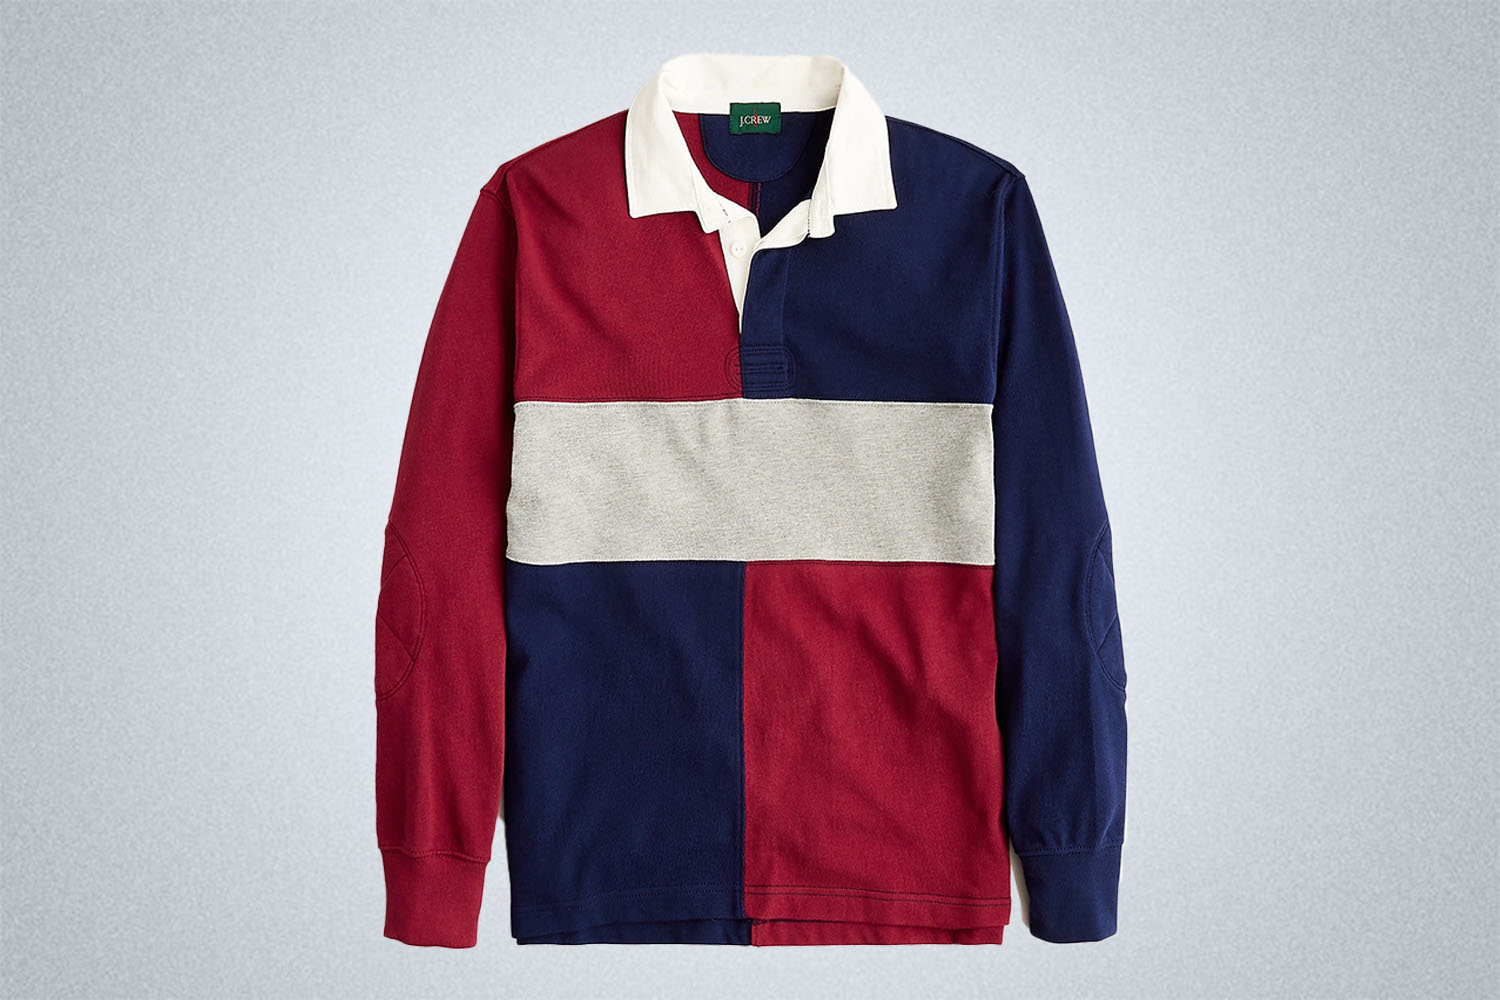 J.Crew Colorblock Rugby Shirt